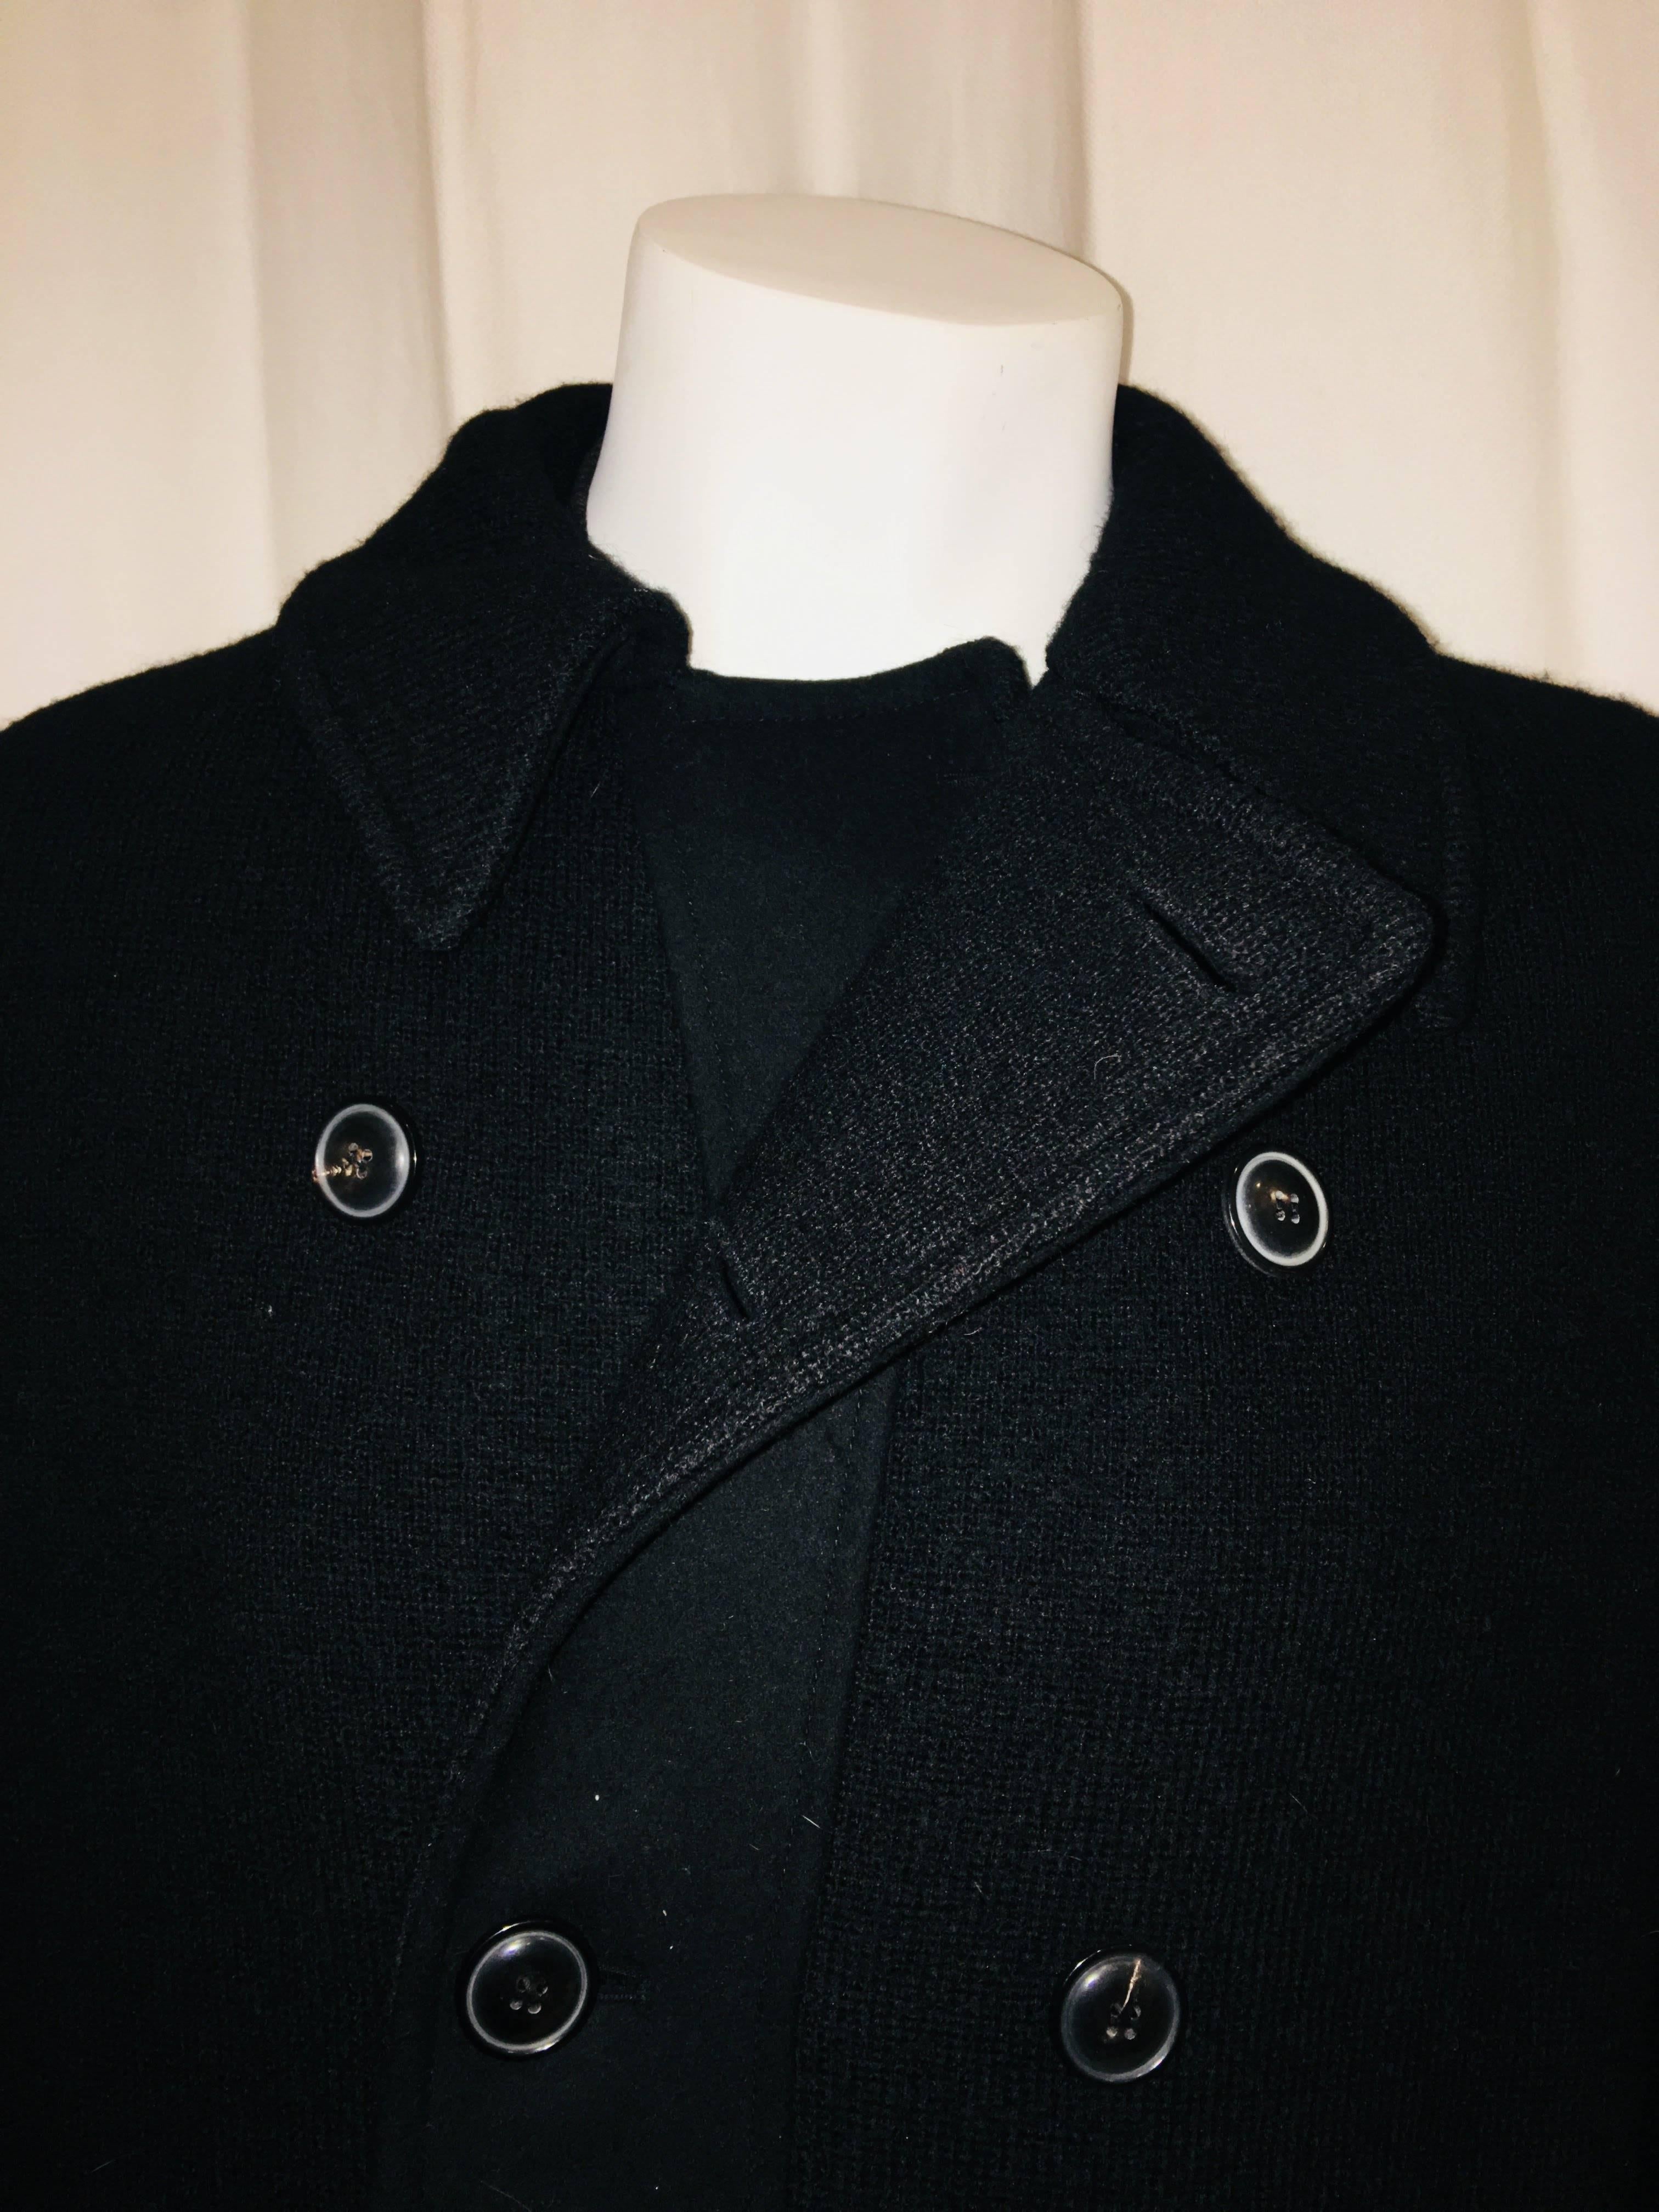 Giorgio Armani Double Breasted Black Wool Blend Knit Peacoat